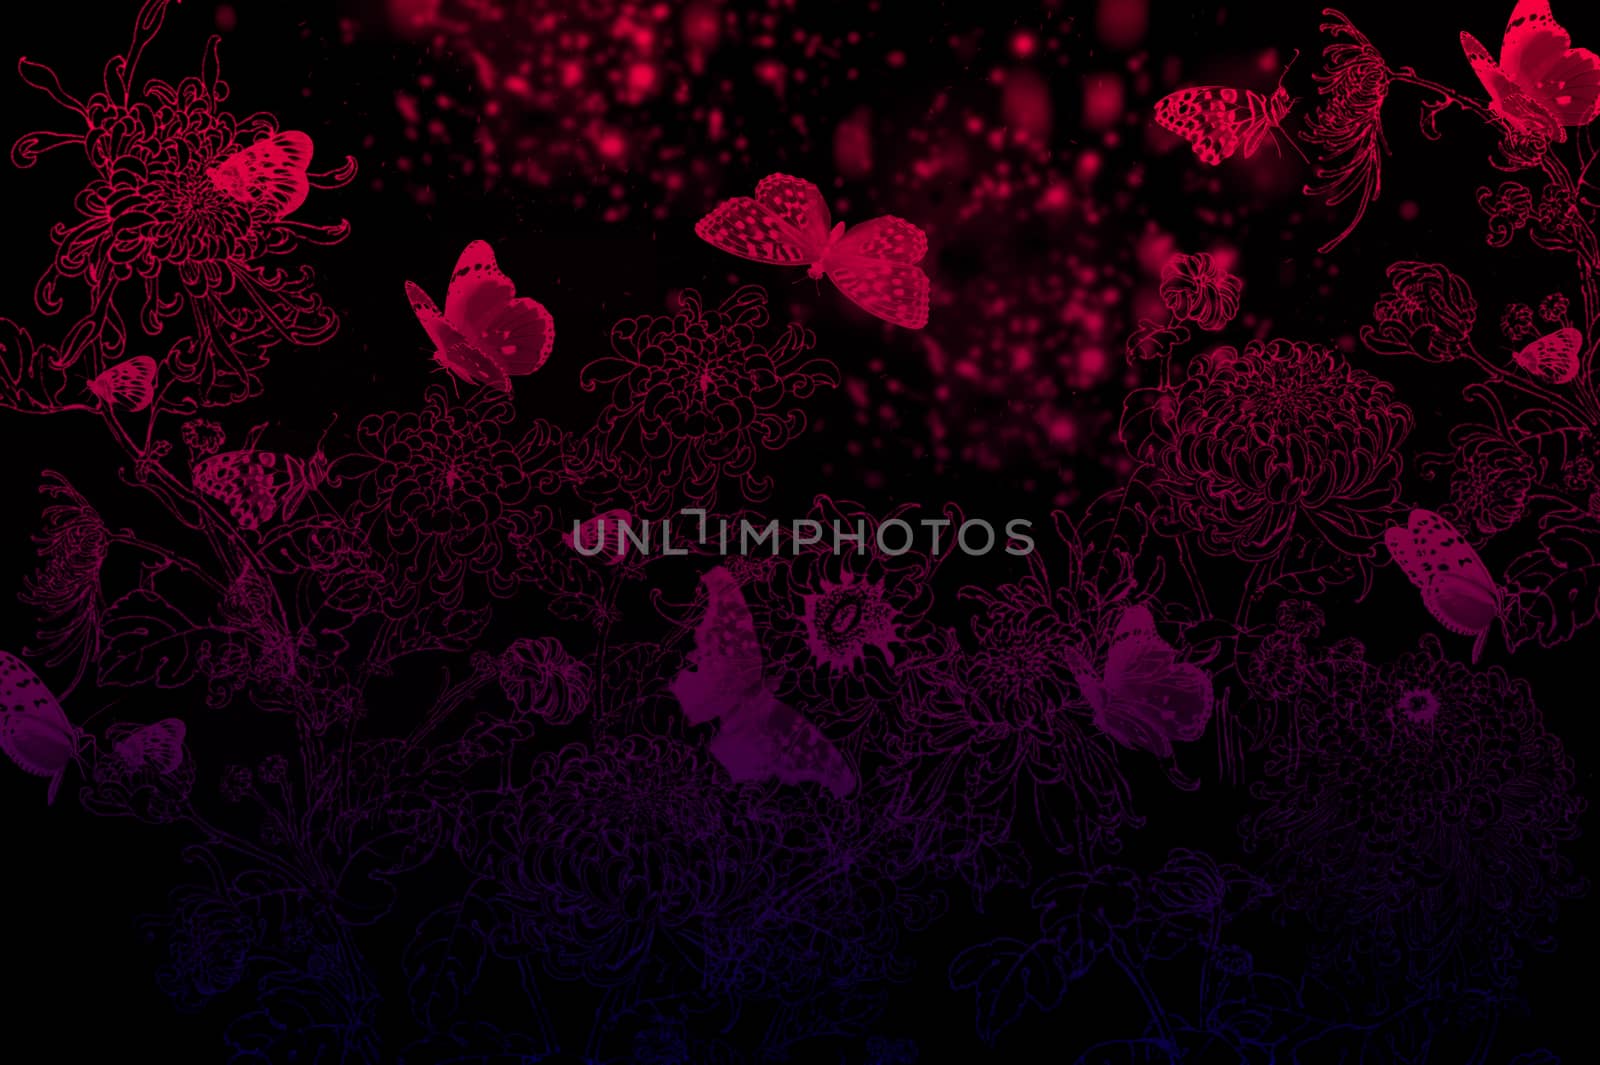 Butterflies and flowers in diffuse background